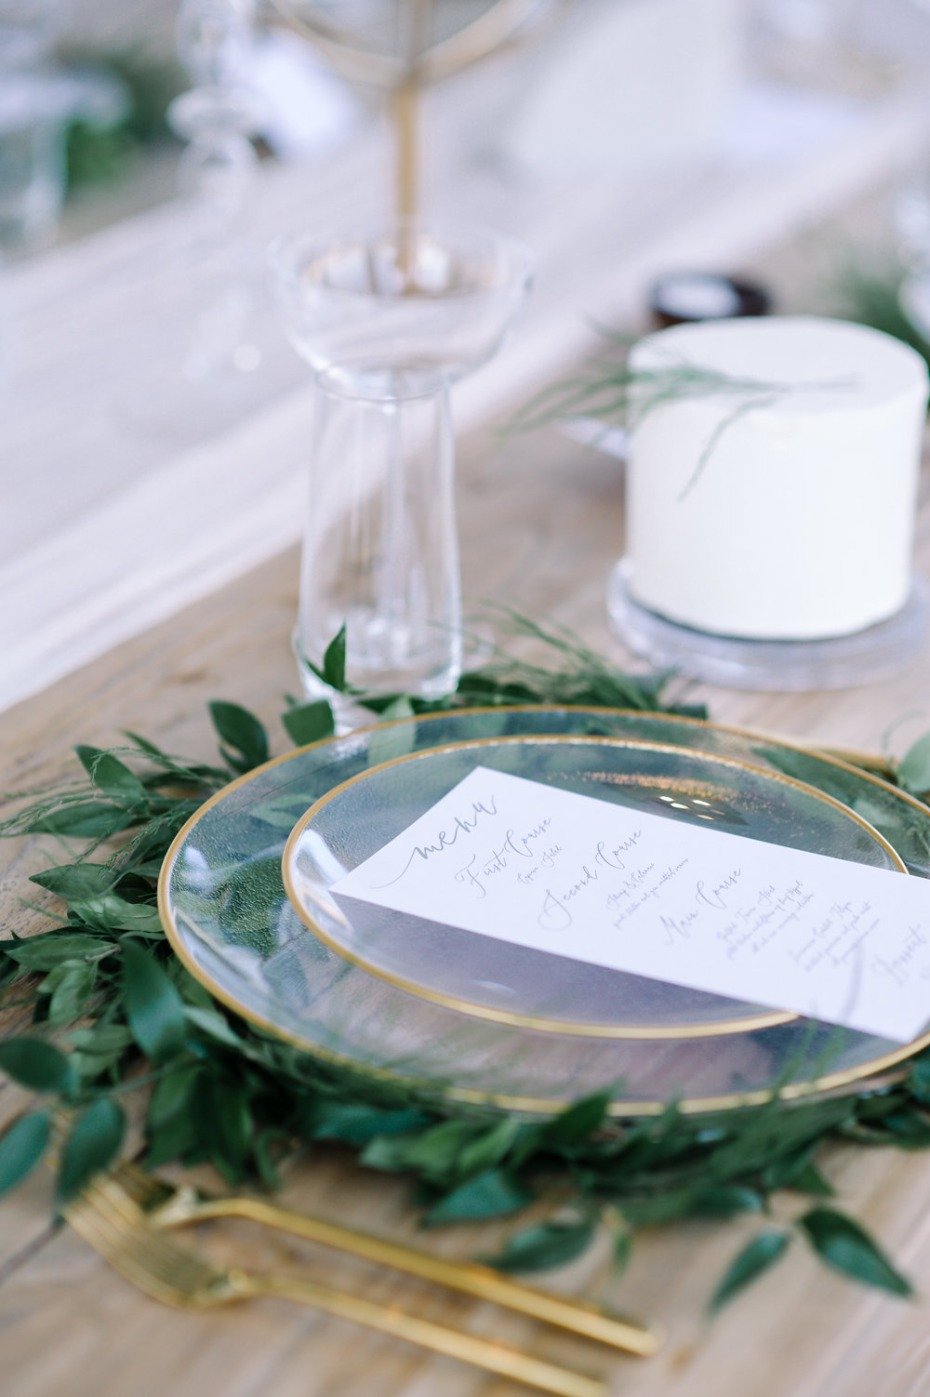 glass and gold place setting with greenery wreath charger